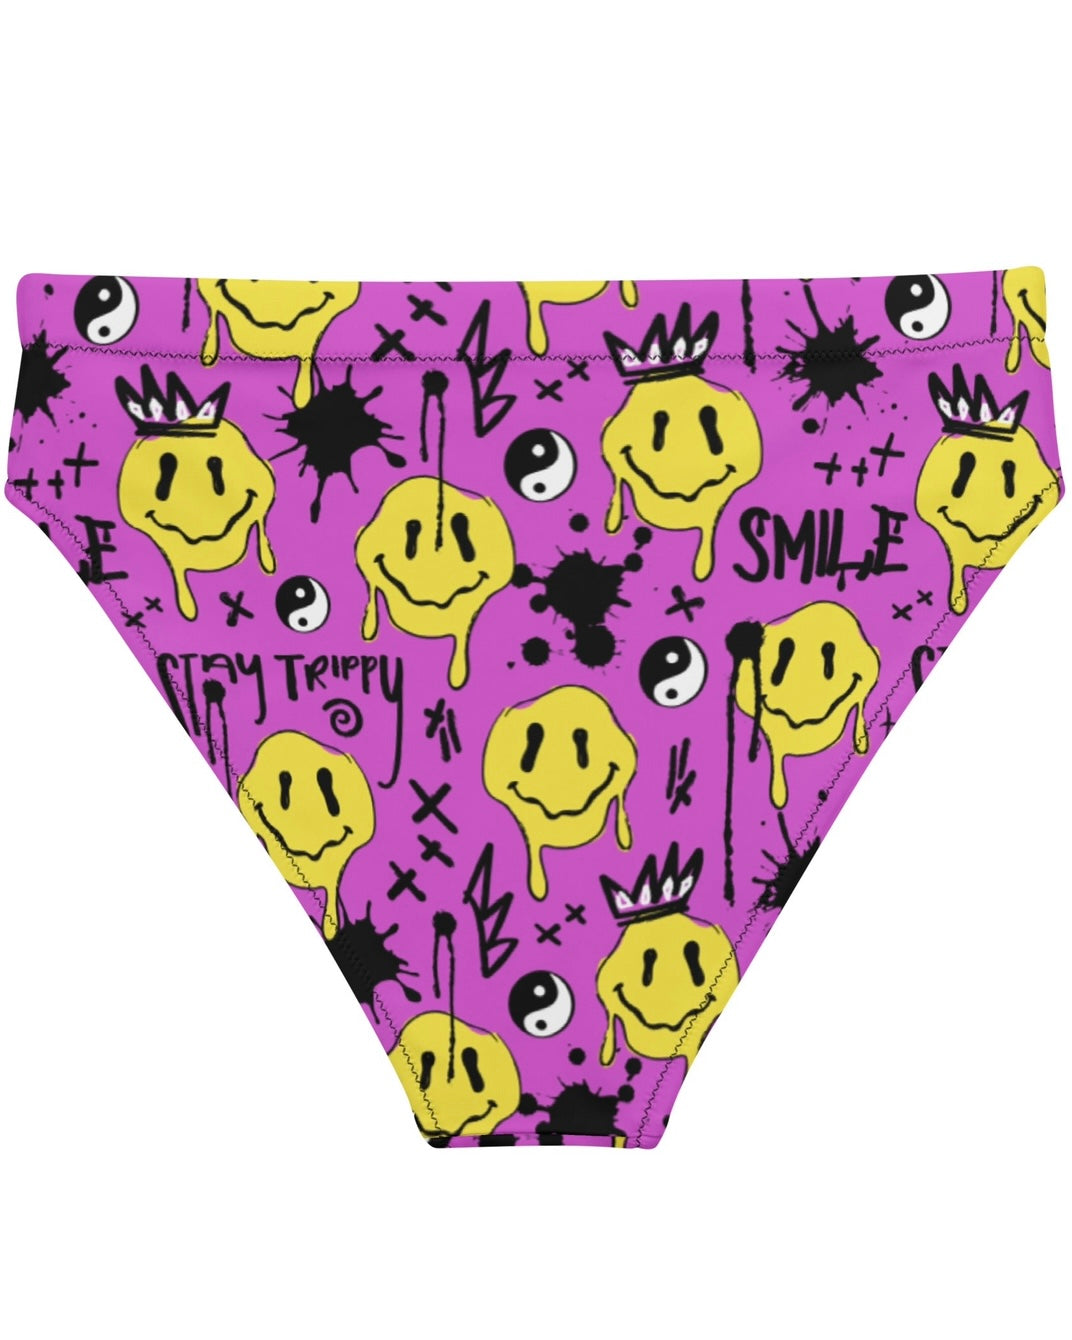 Smile Splatter Recycled High Waisted Bottoms, High-Waisted Bottoms, - One Stop Rave